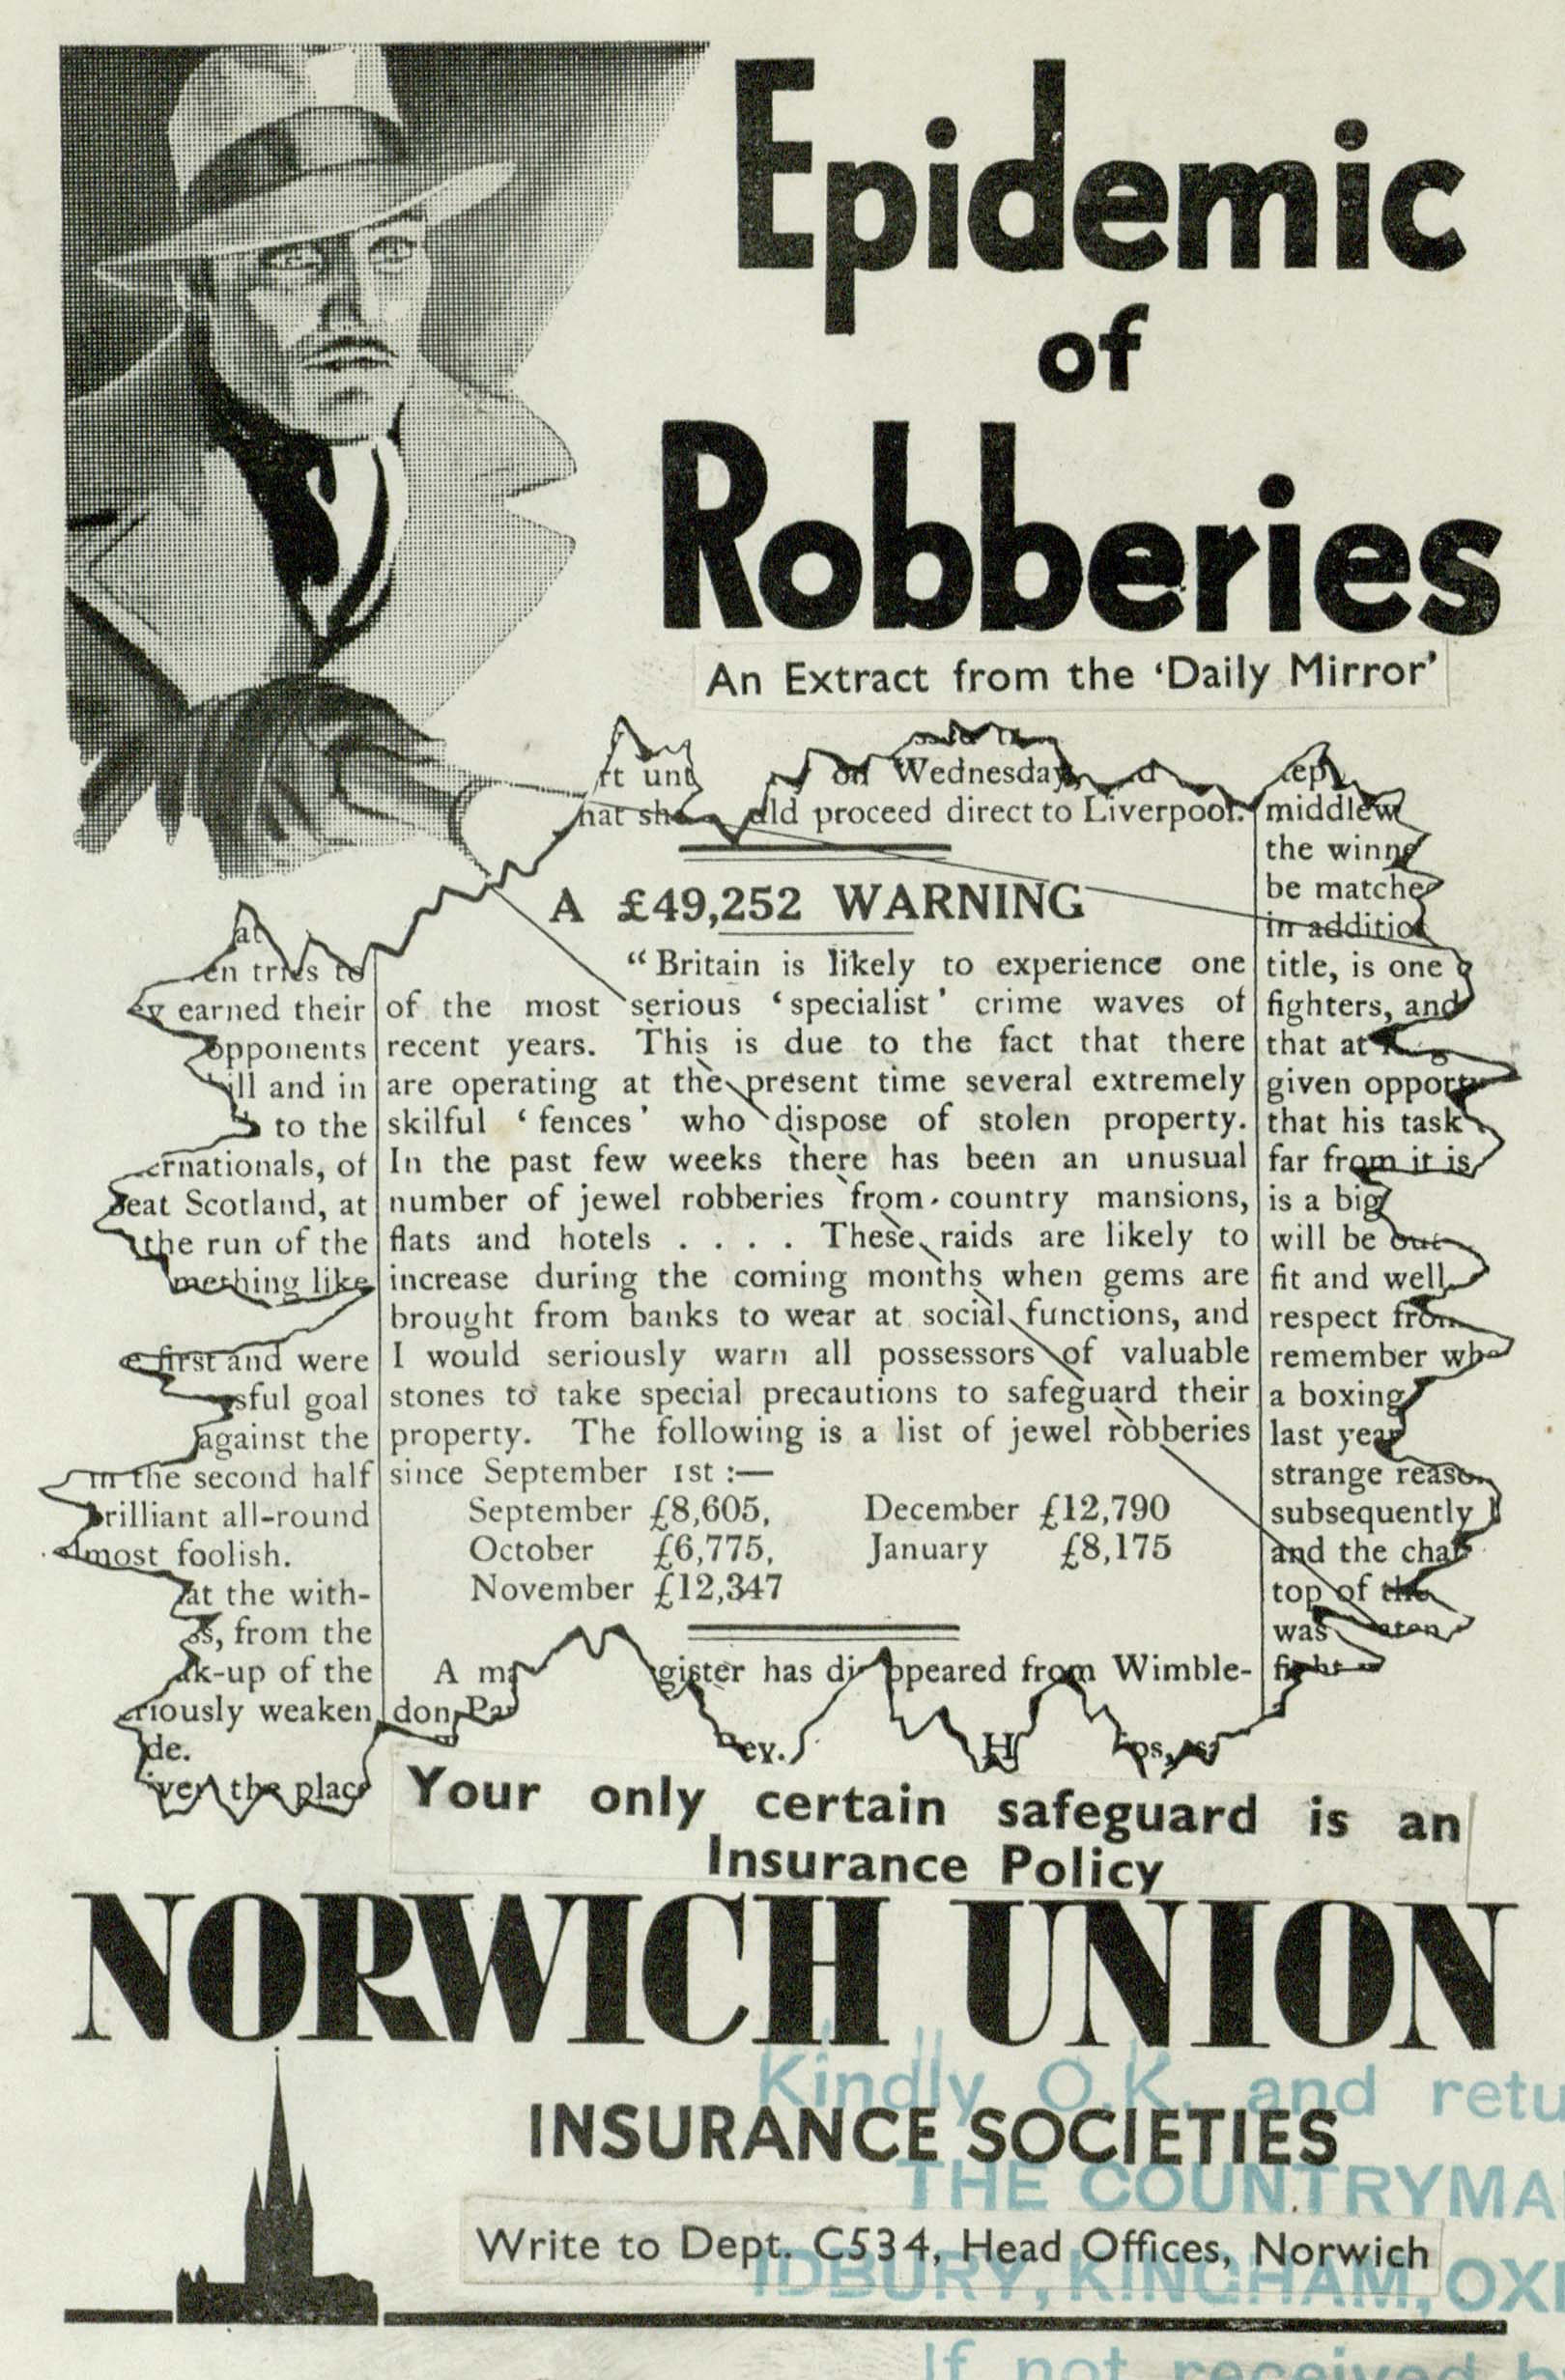 Norwich Union advert from 1935 - the headline is about an epidemic of robberies, features a lot of text and stats about burglaries in the UK, and finishes by saying 'your only certain safeguard is an insurance policy'. The advert copy is being lit up by the torch of an old fashioned thief.